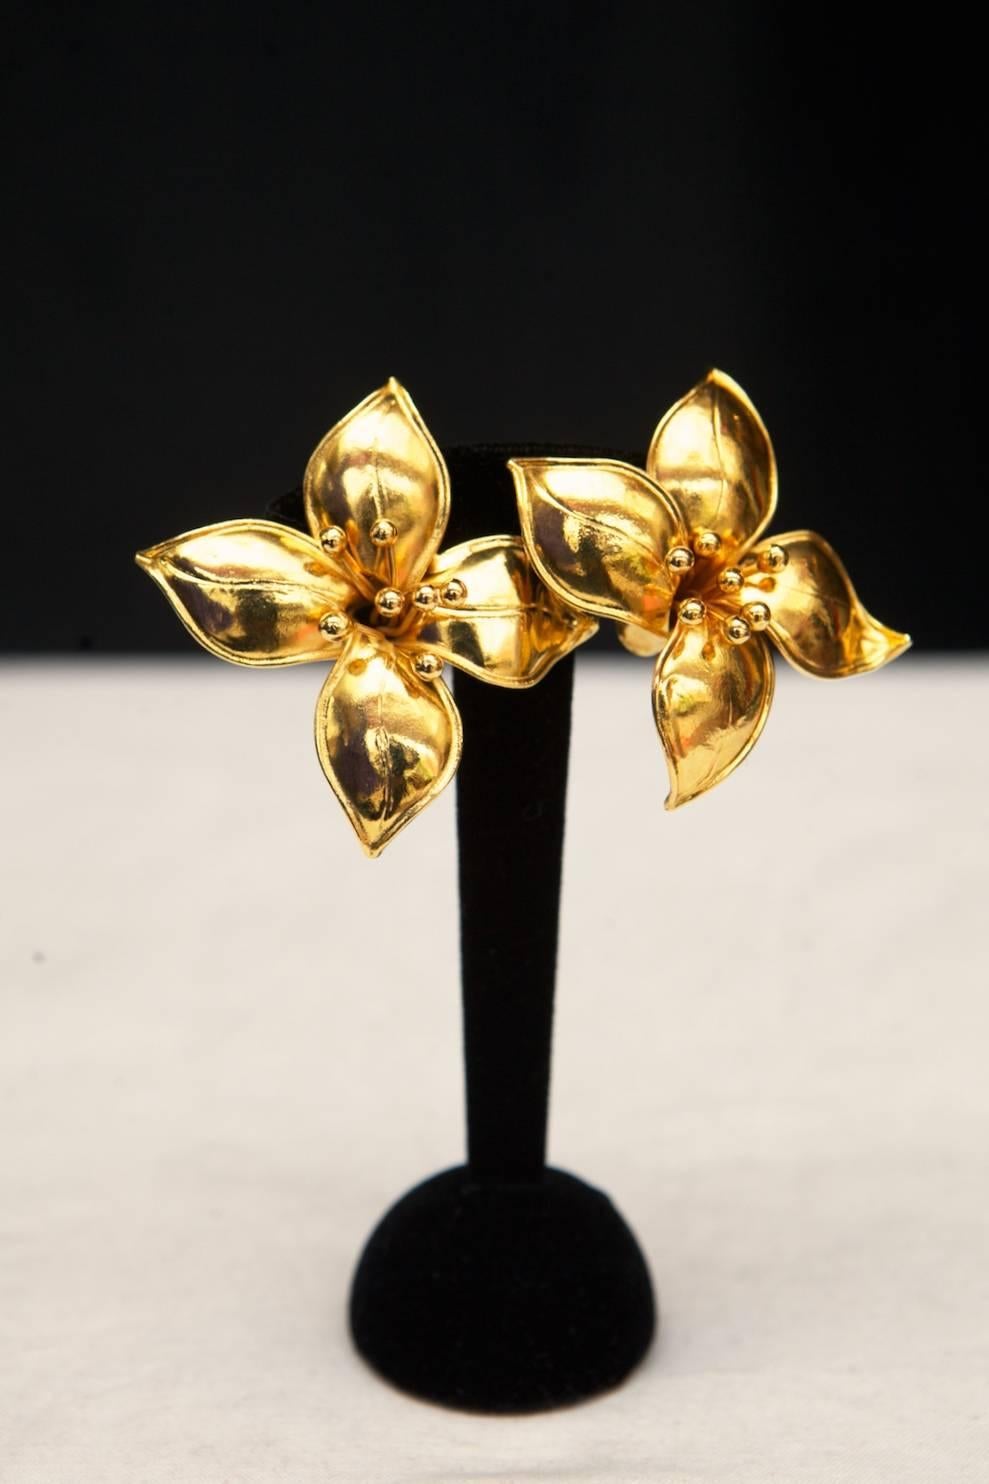 VALENTINO COUTURE Clip on earrings in gilt metal featuring flowers in the style of lilies.

Signed at the rear
. 
Date of the 1990s

Very good condition.

Measurements: 6 cm x 5.6 cm